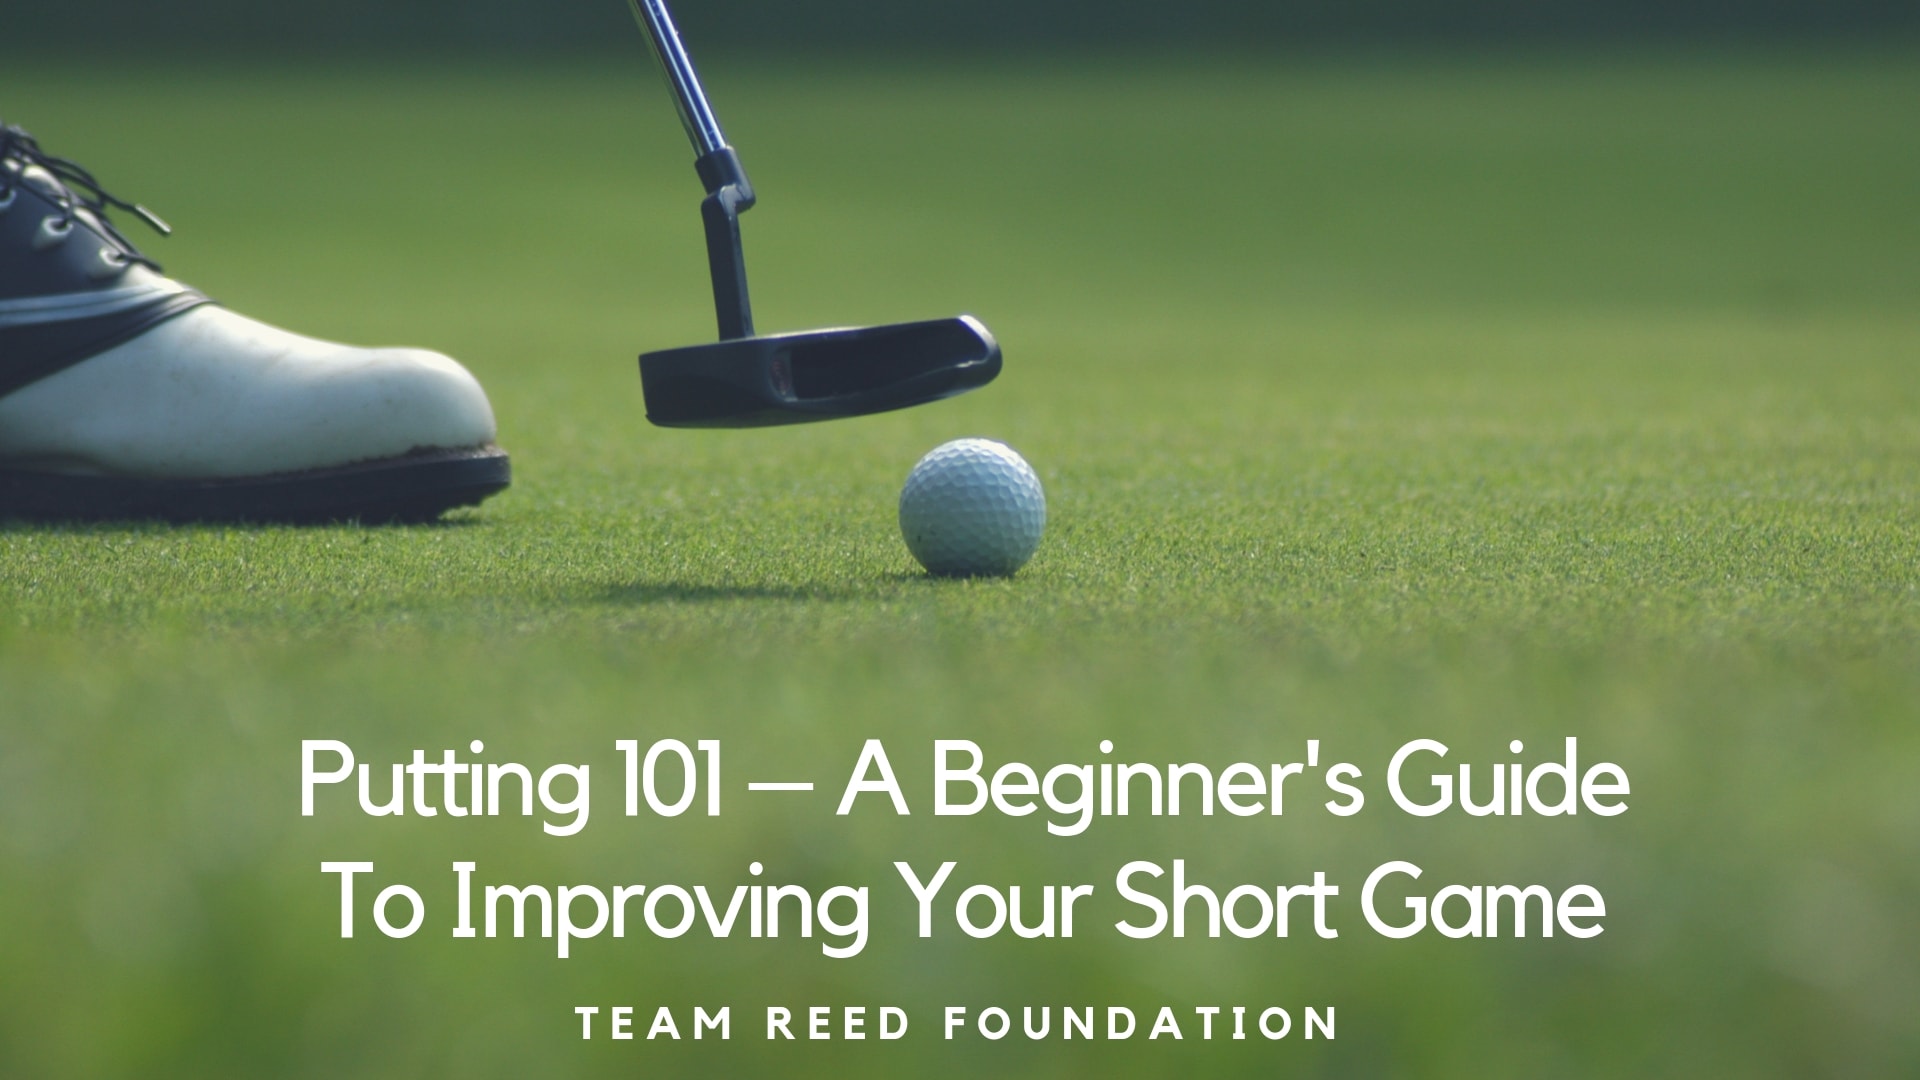 Putting 101 – a Beginner’s Guide To Improving Your Short Game